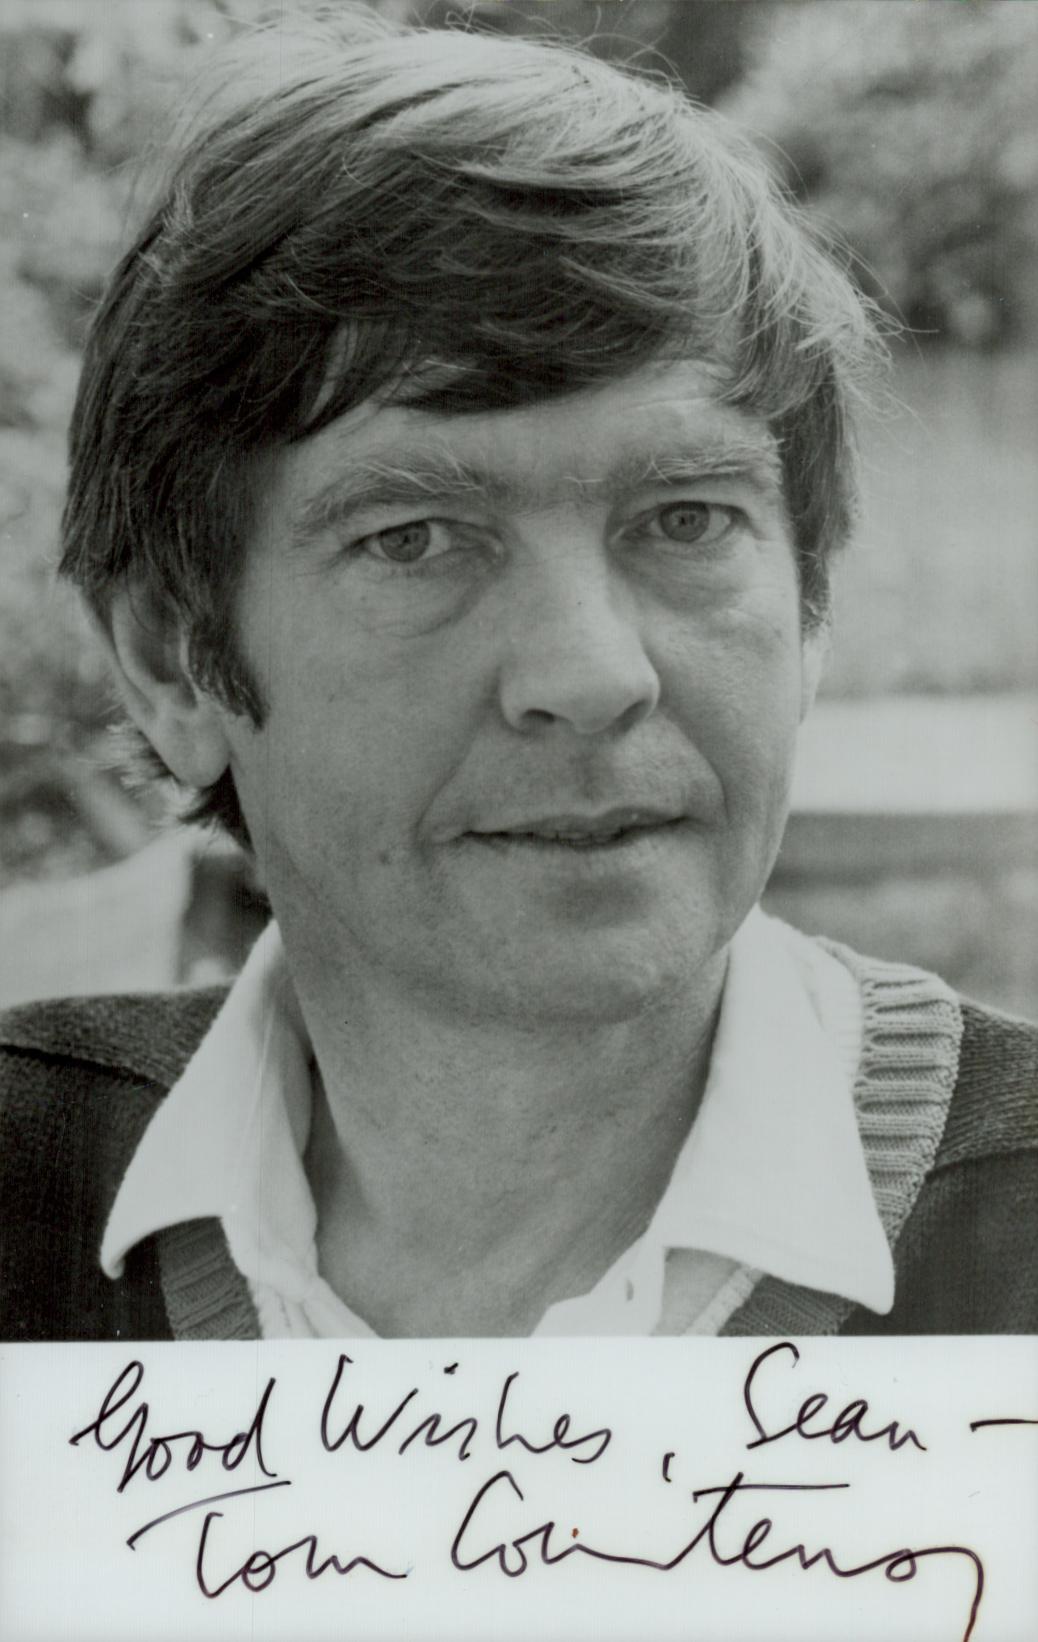 Sir Tom Courtenay signed black & white photo 5.5x3.5 Inch. Dedicated. Is an English actor. After